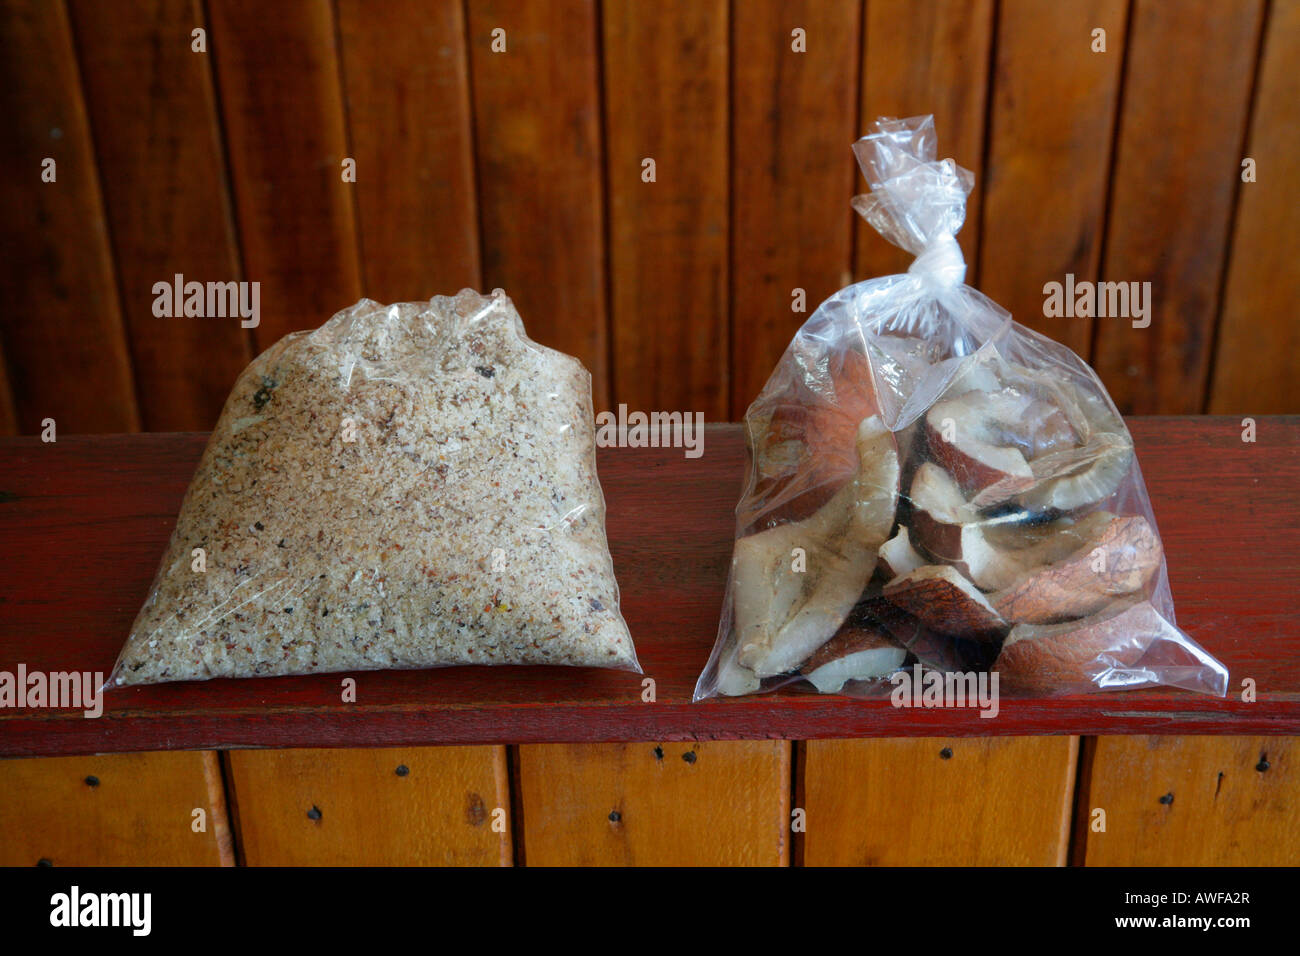 Coconut products, shavings and chips, coconut processing, Georgetown, Guyana, South America Stock Photo